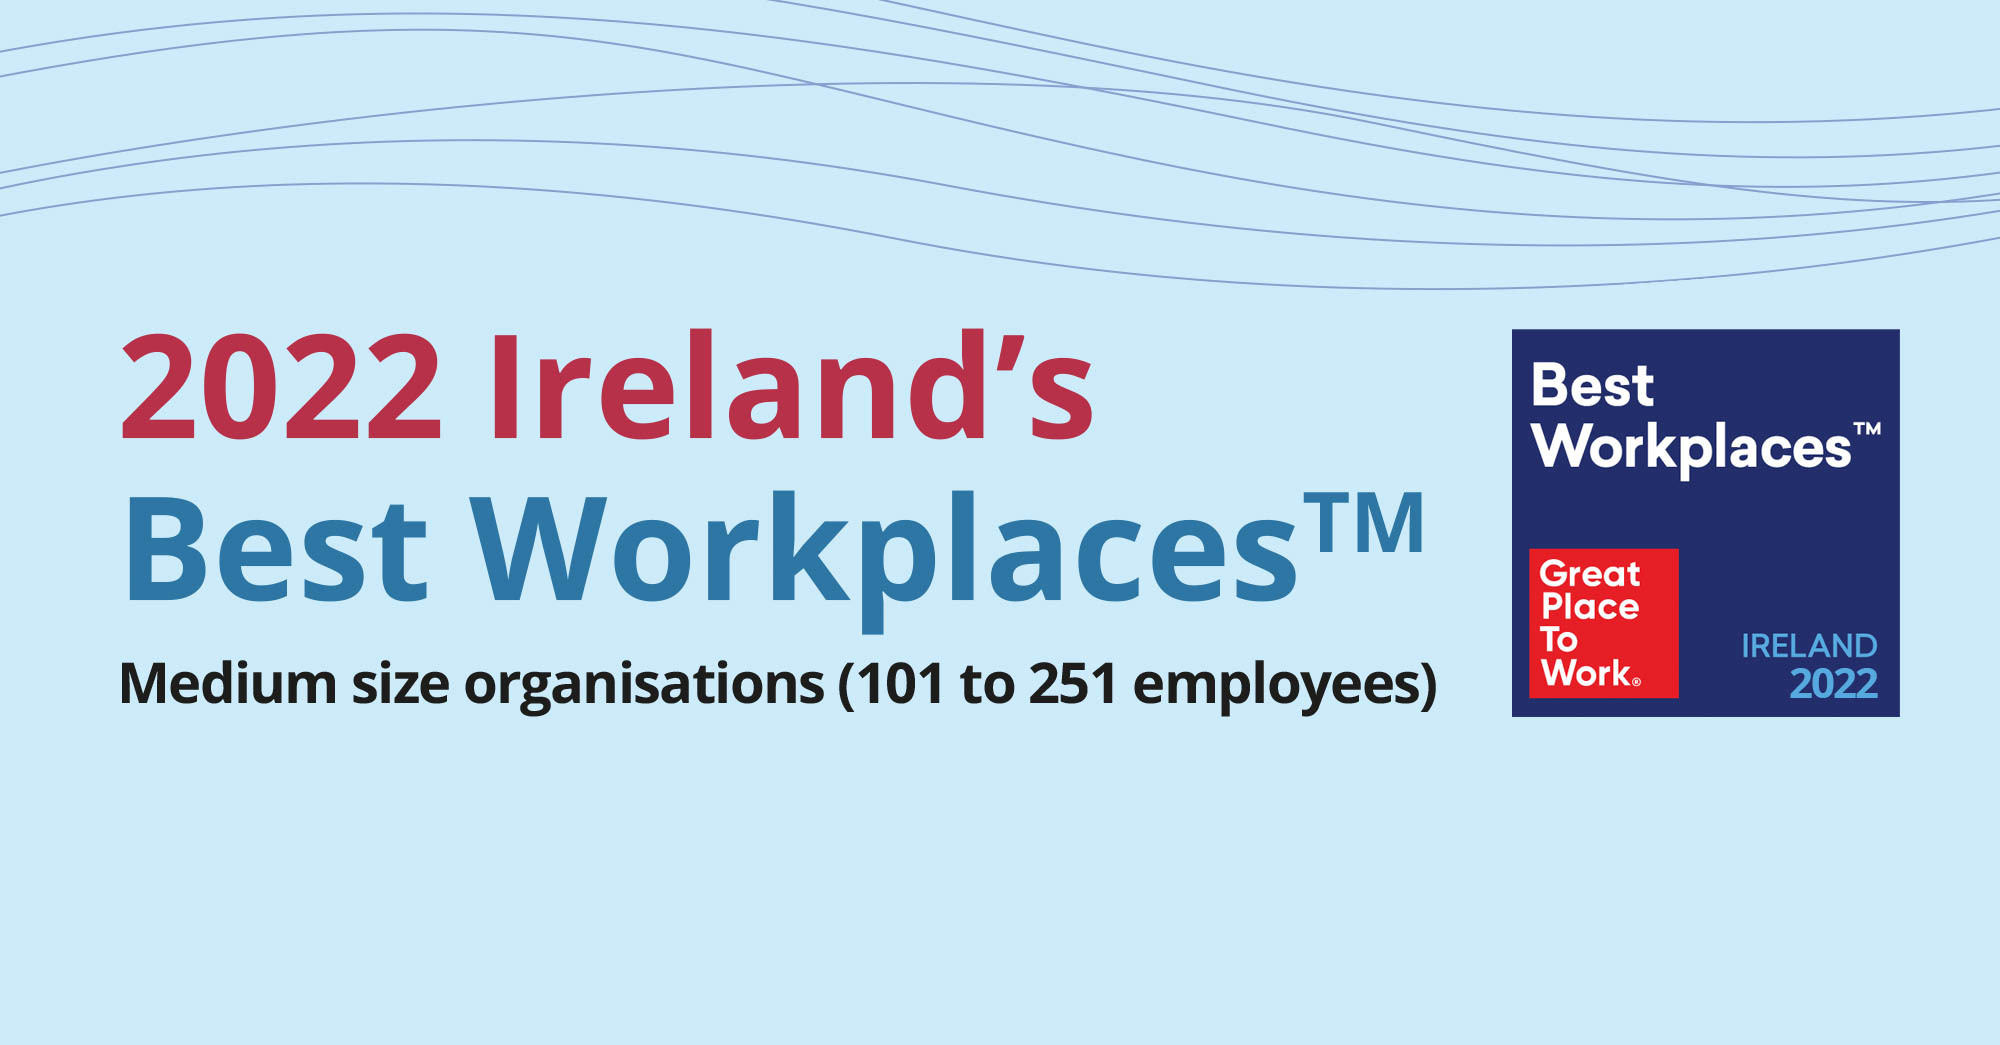 We’re one of Ireland’s Best Workplaces™ 2022 and won a Special Award